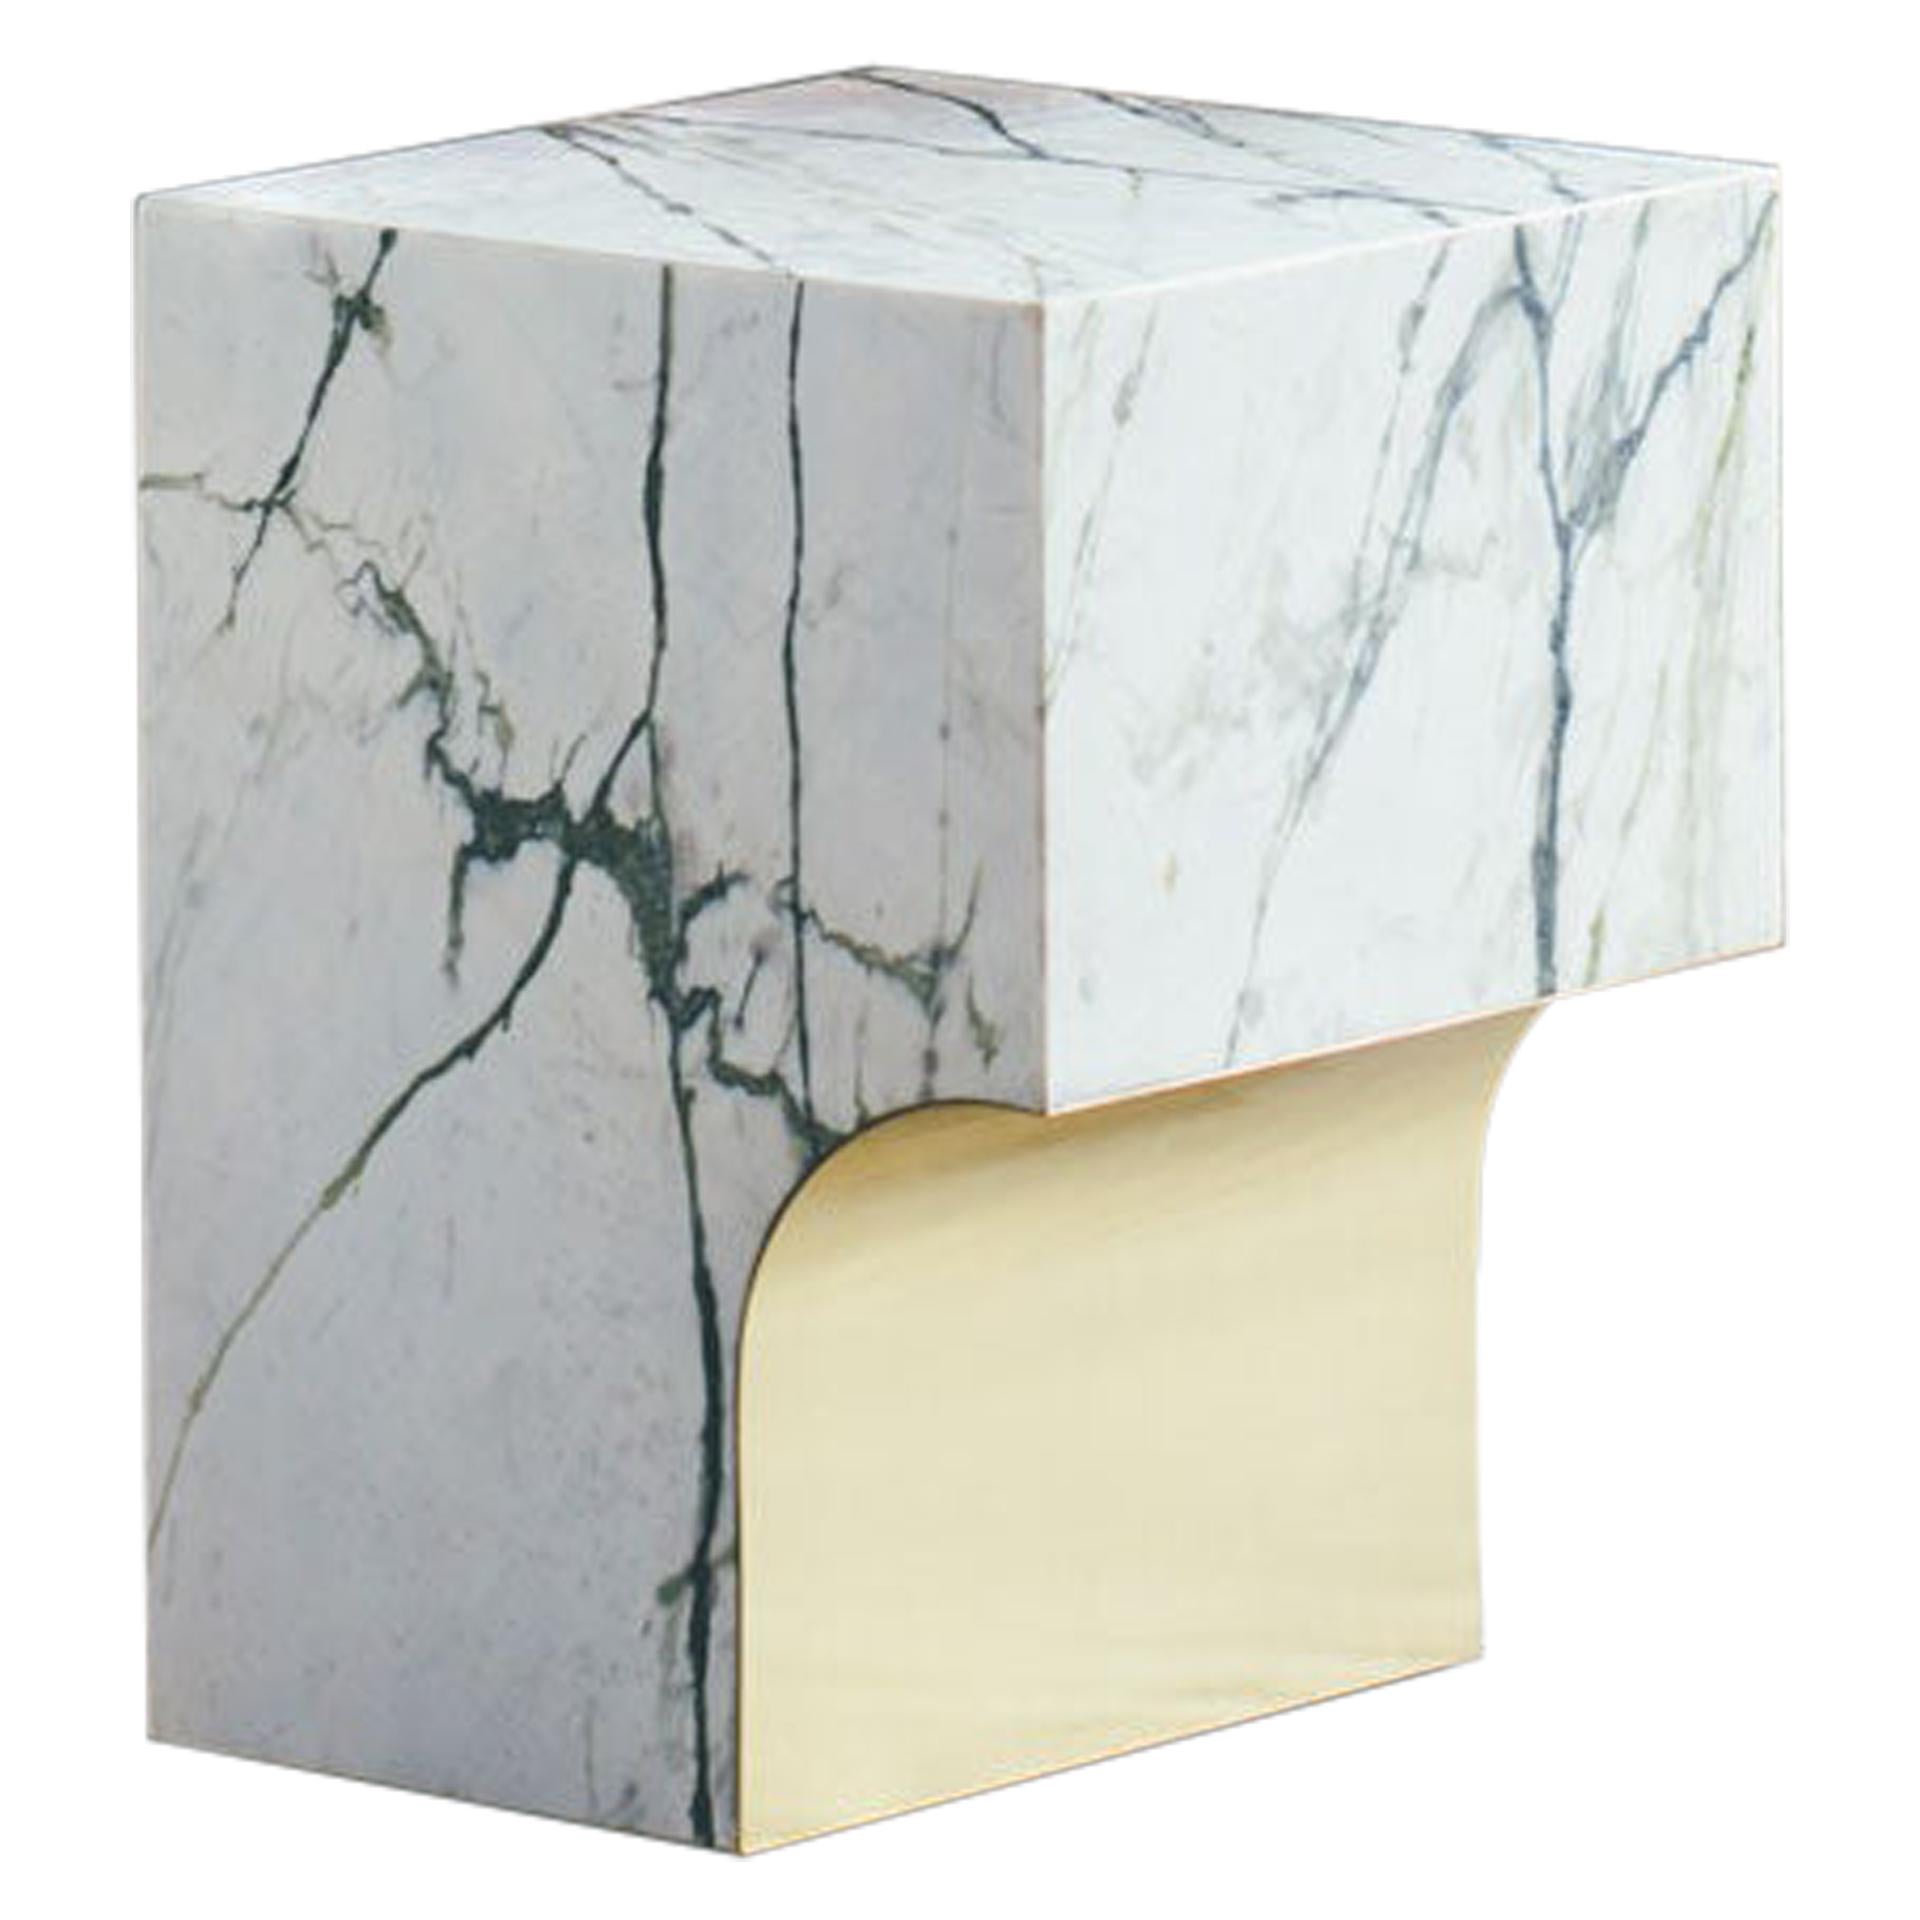 Limited edition contemporary stool or side table, marble & brass, Belgian design